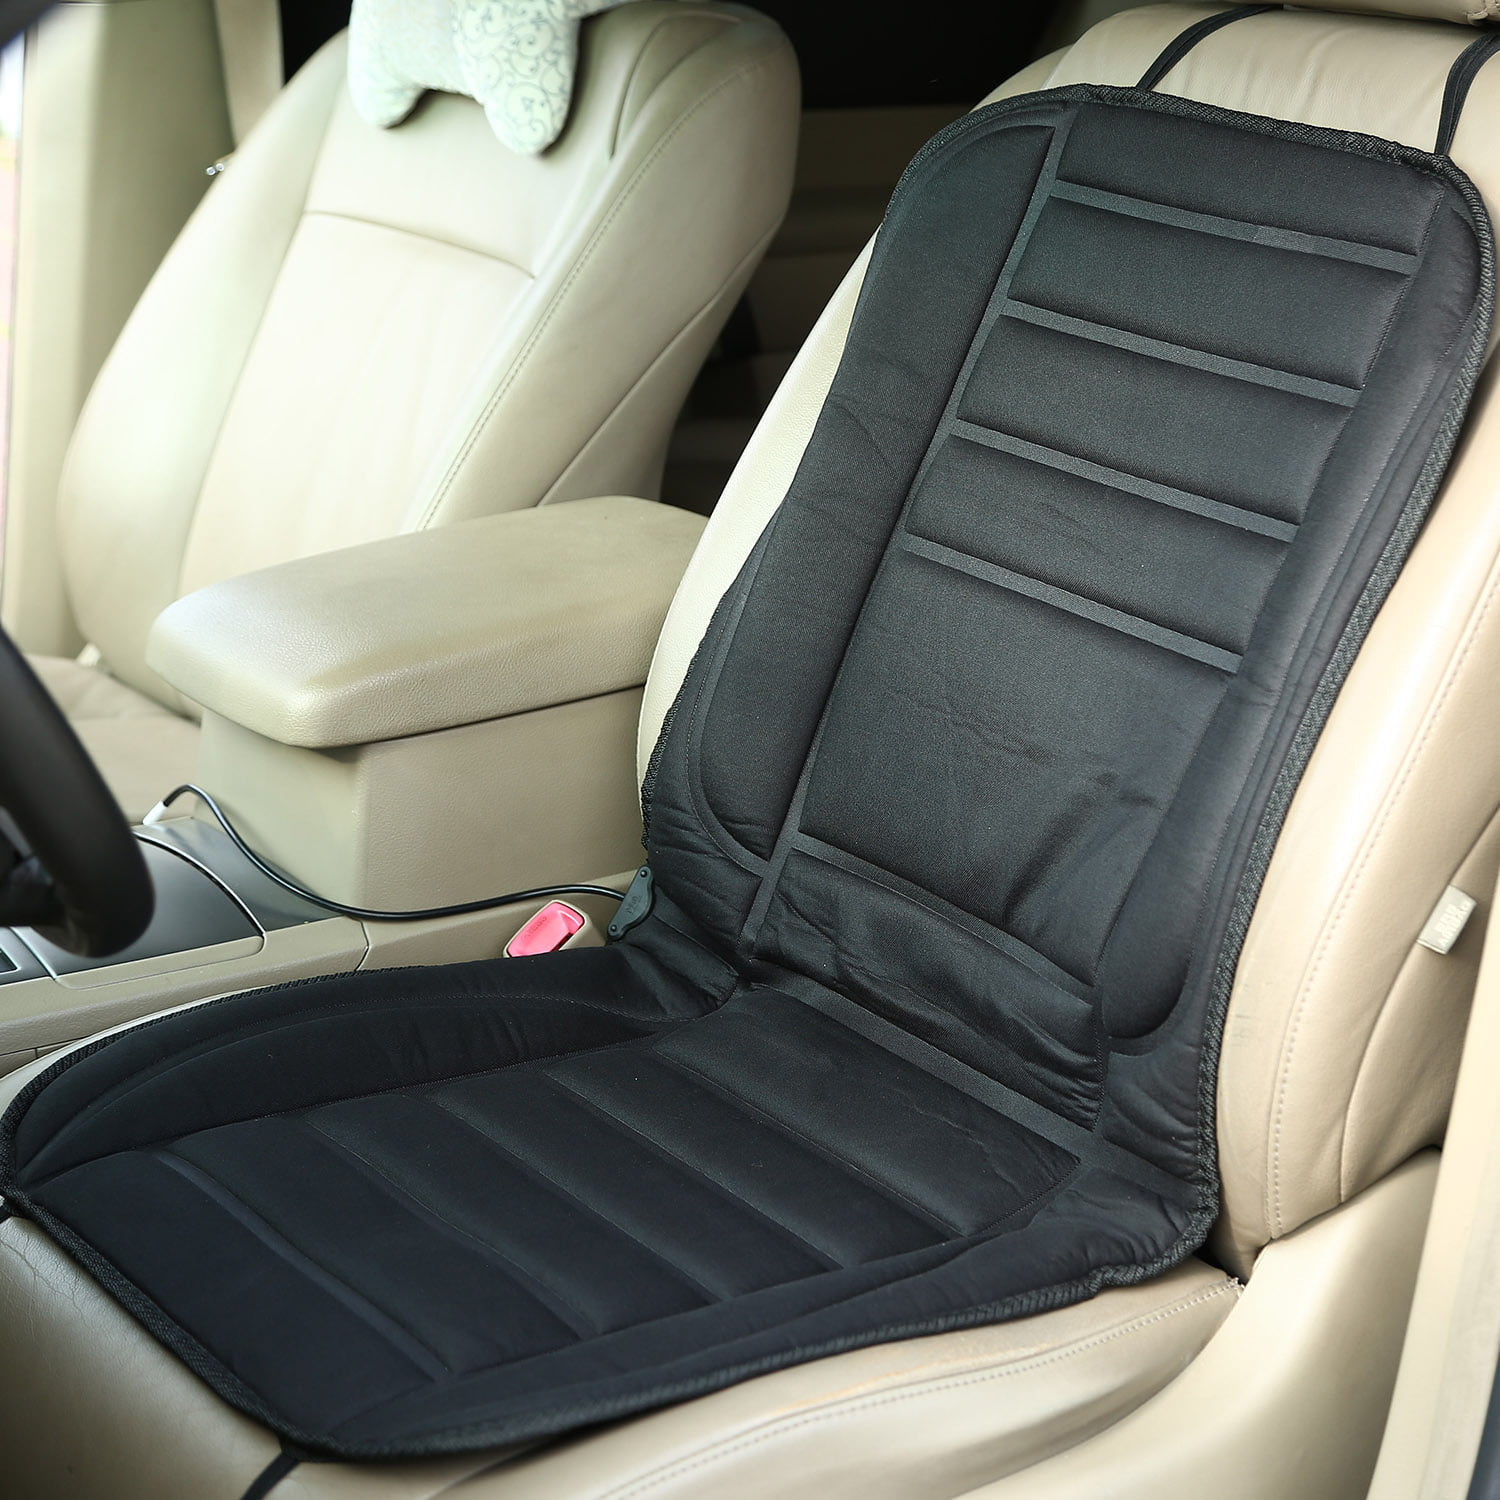 heated car seat covers - Home Ideas House Designs Photos and Decorating